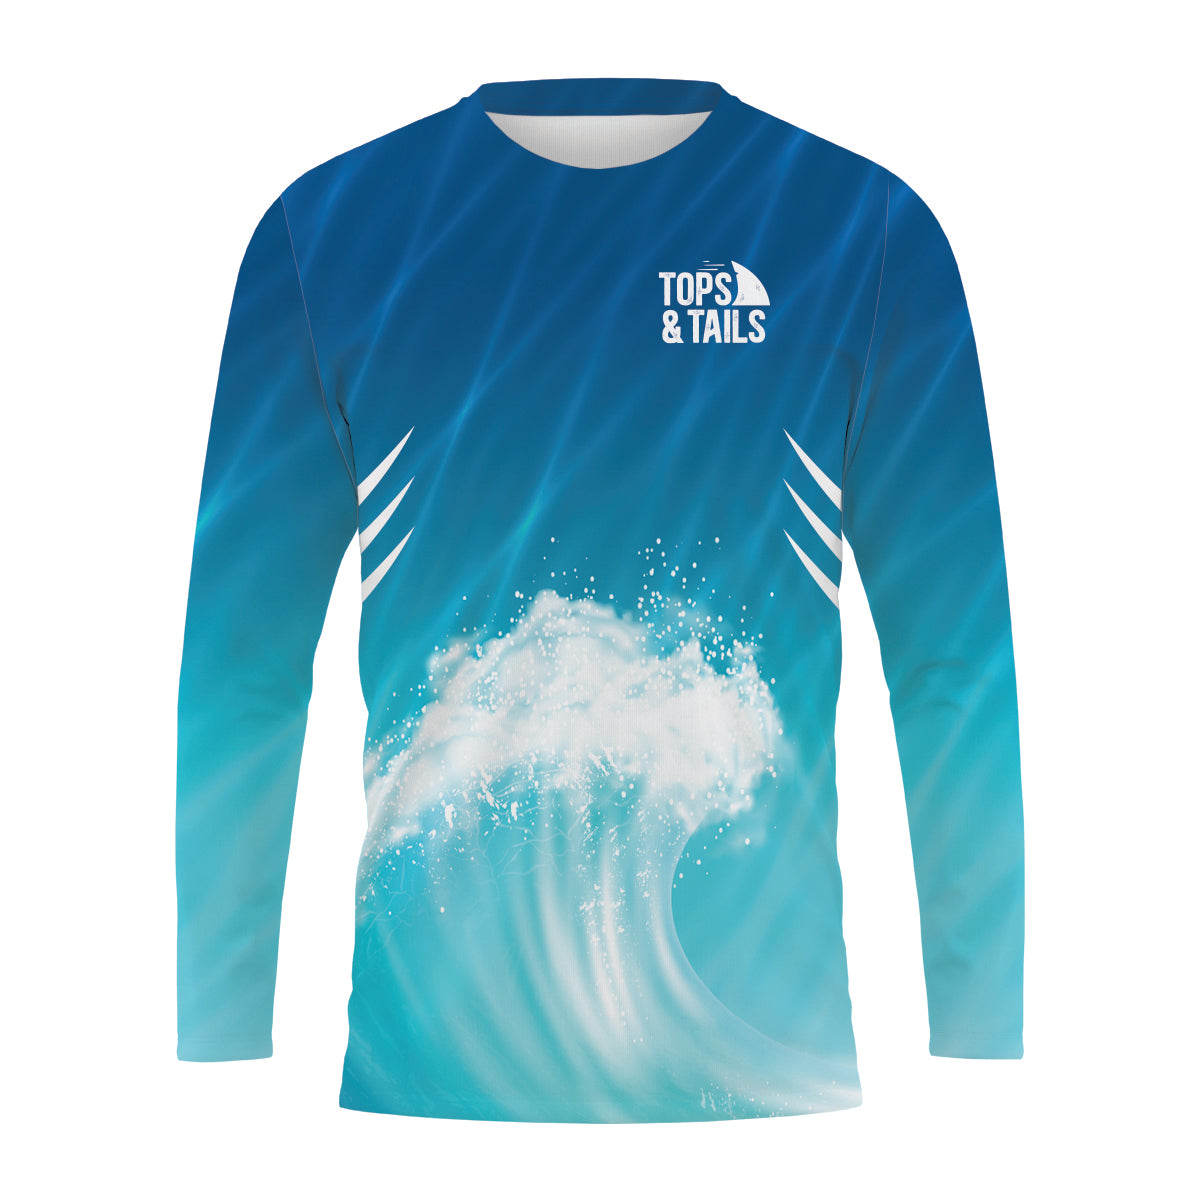 Shark on a Wave Long Sleeve Performance Shirt - Made in the USA